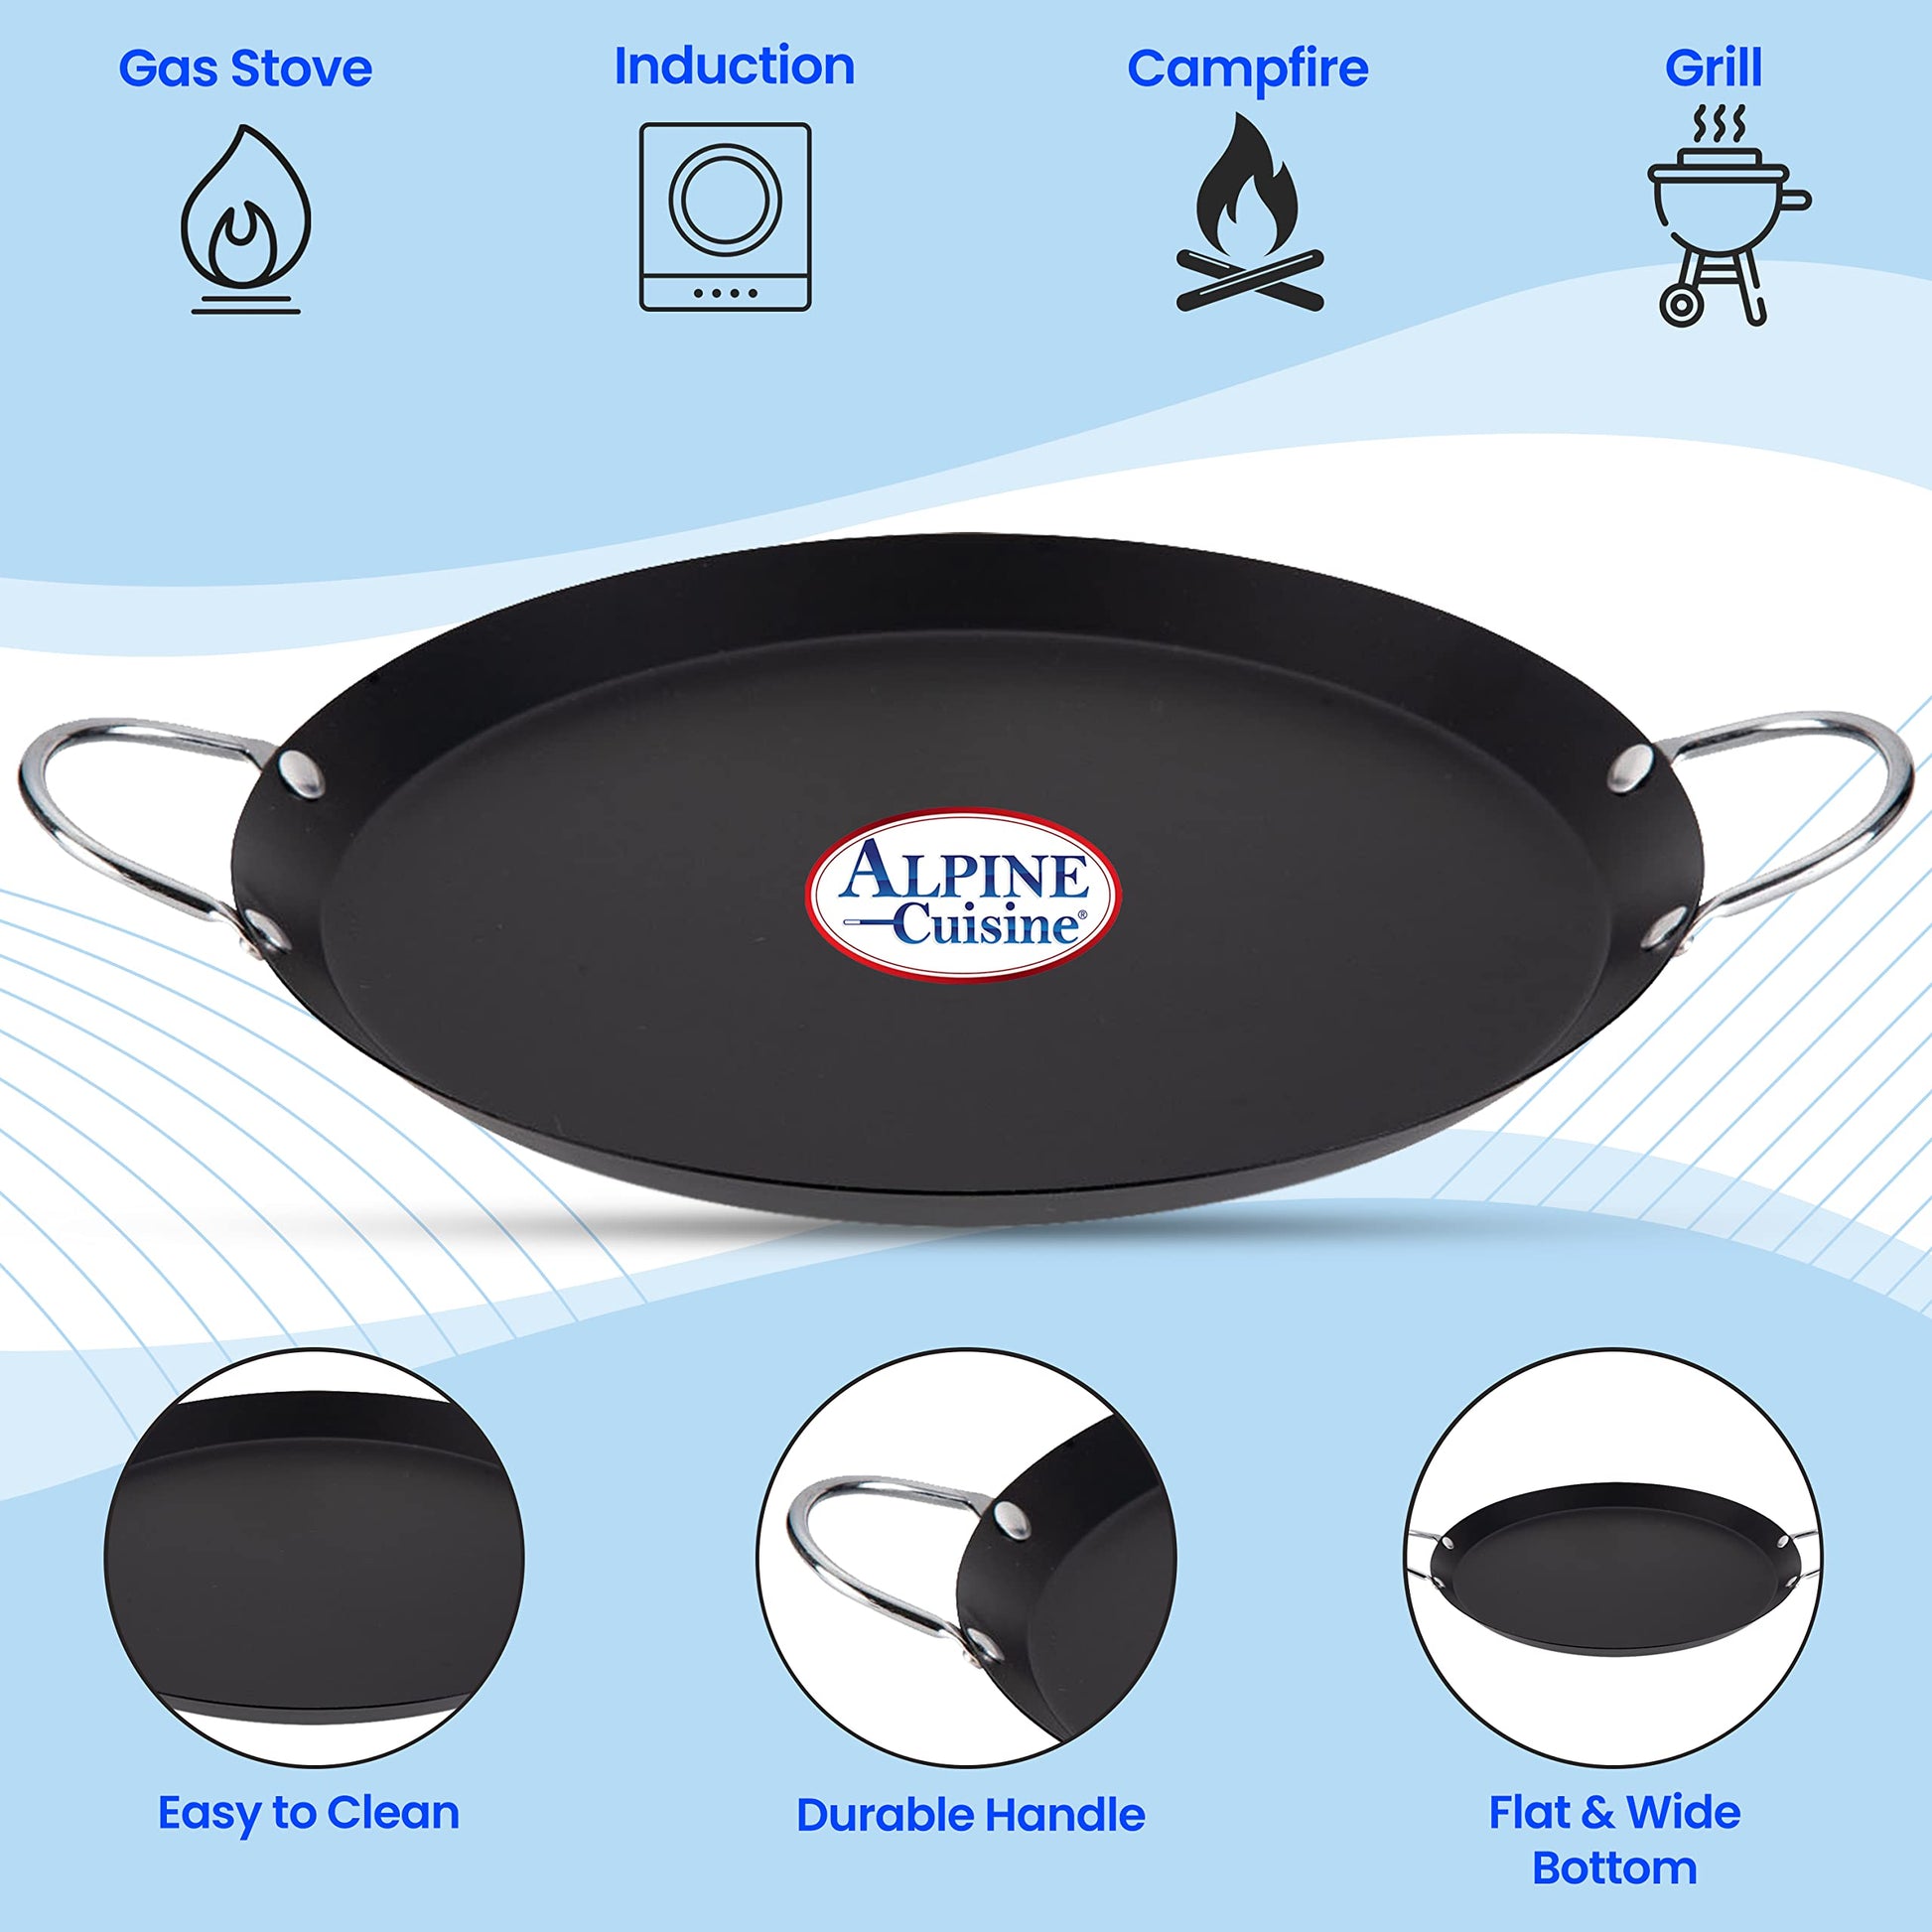 Round Mexican Style Comal Griddle Redondo Carbon Steel 11 Non-Stick